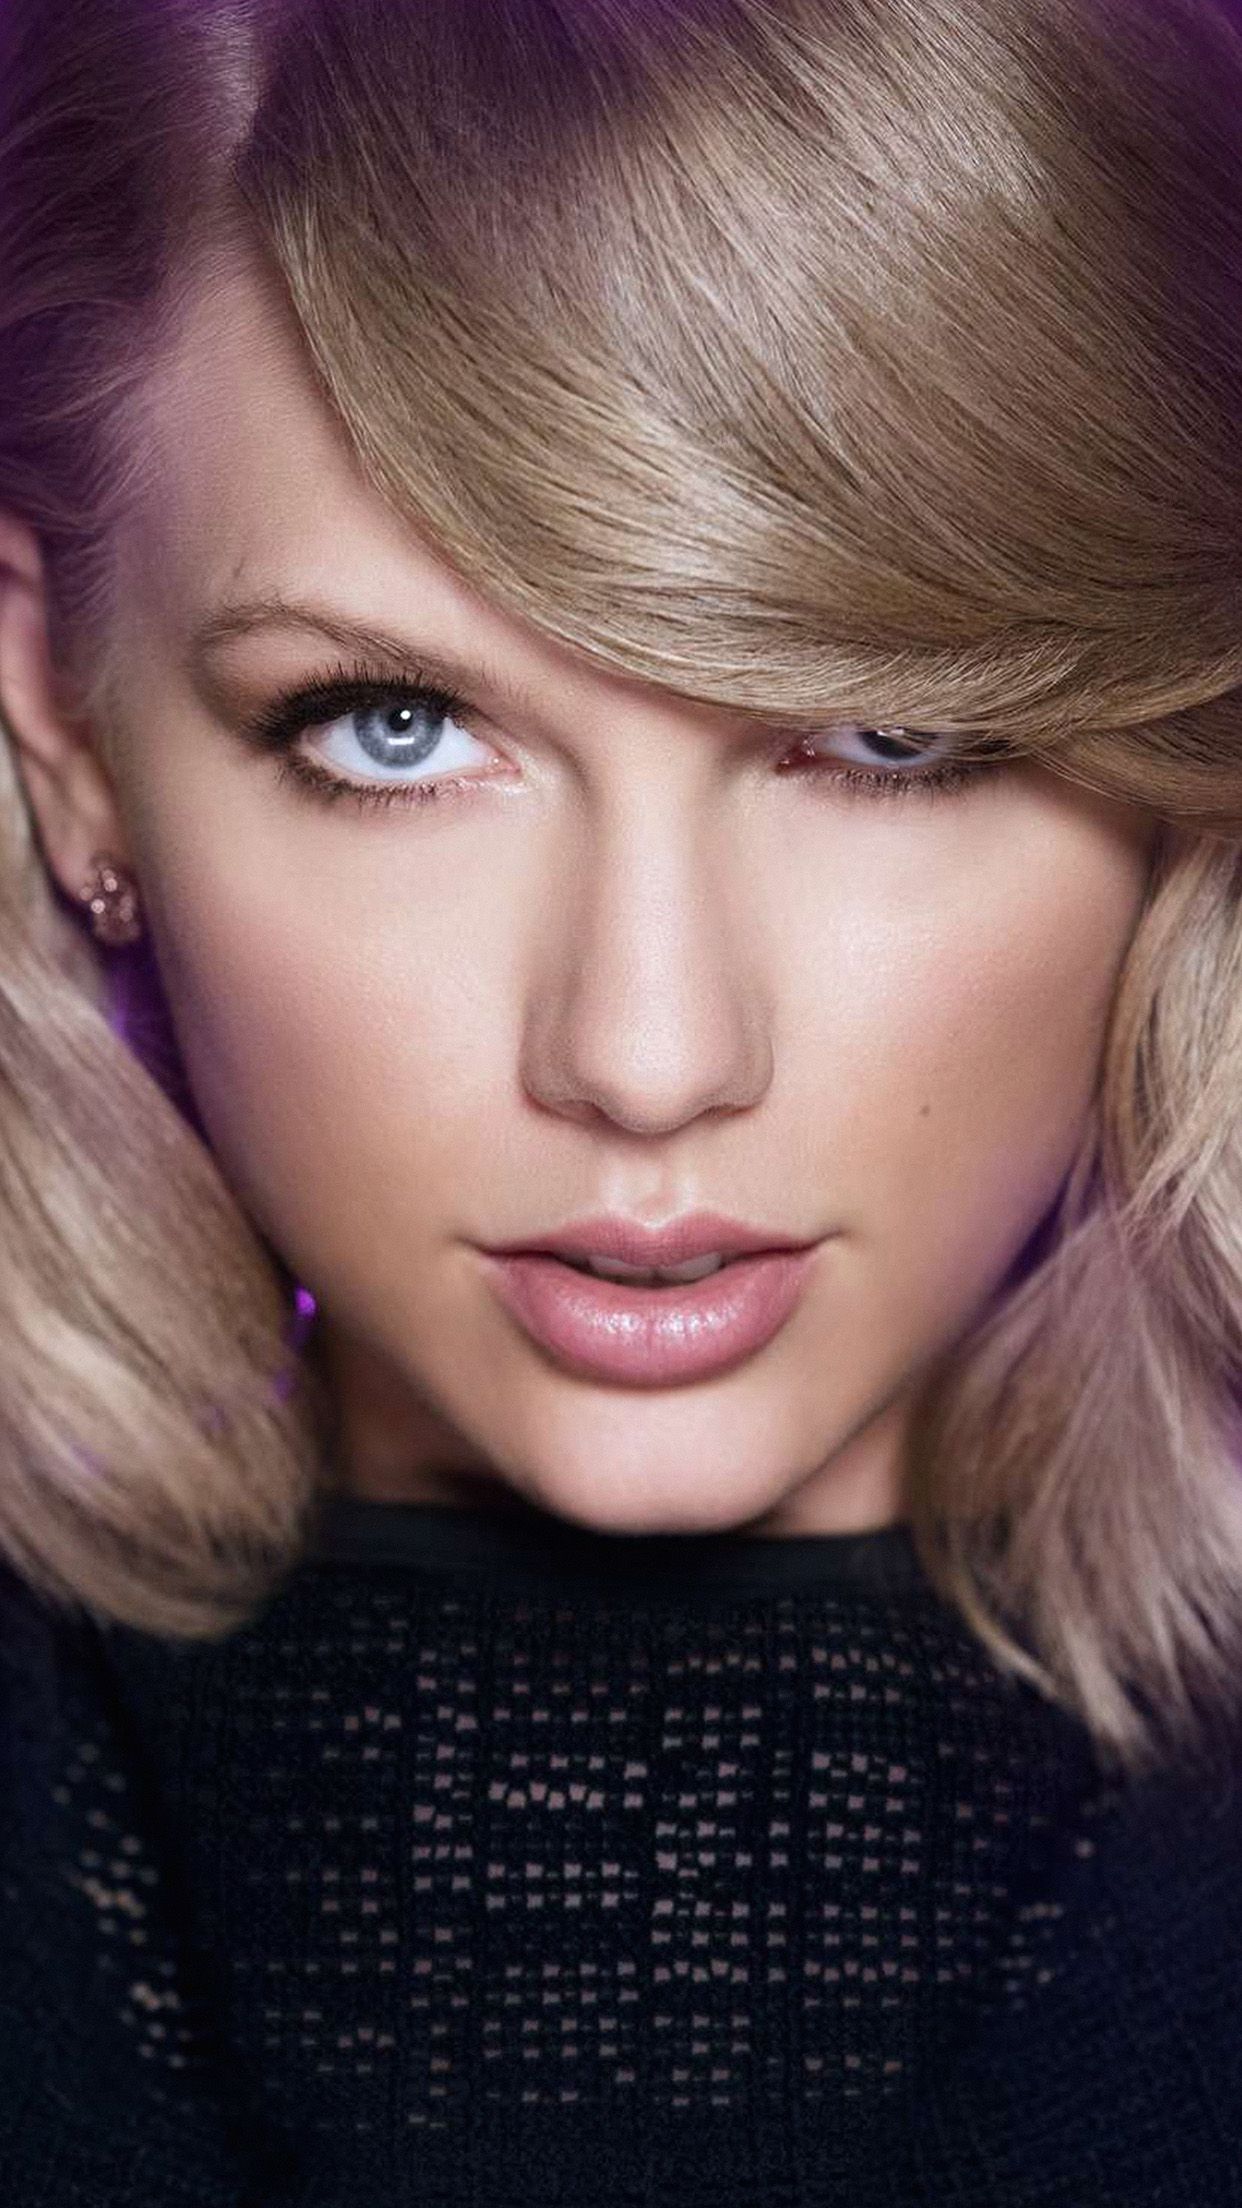 Taylor Swift Face Music Celebrity Android wallpaper HD